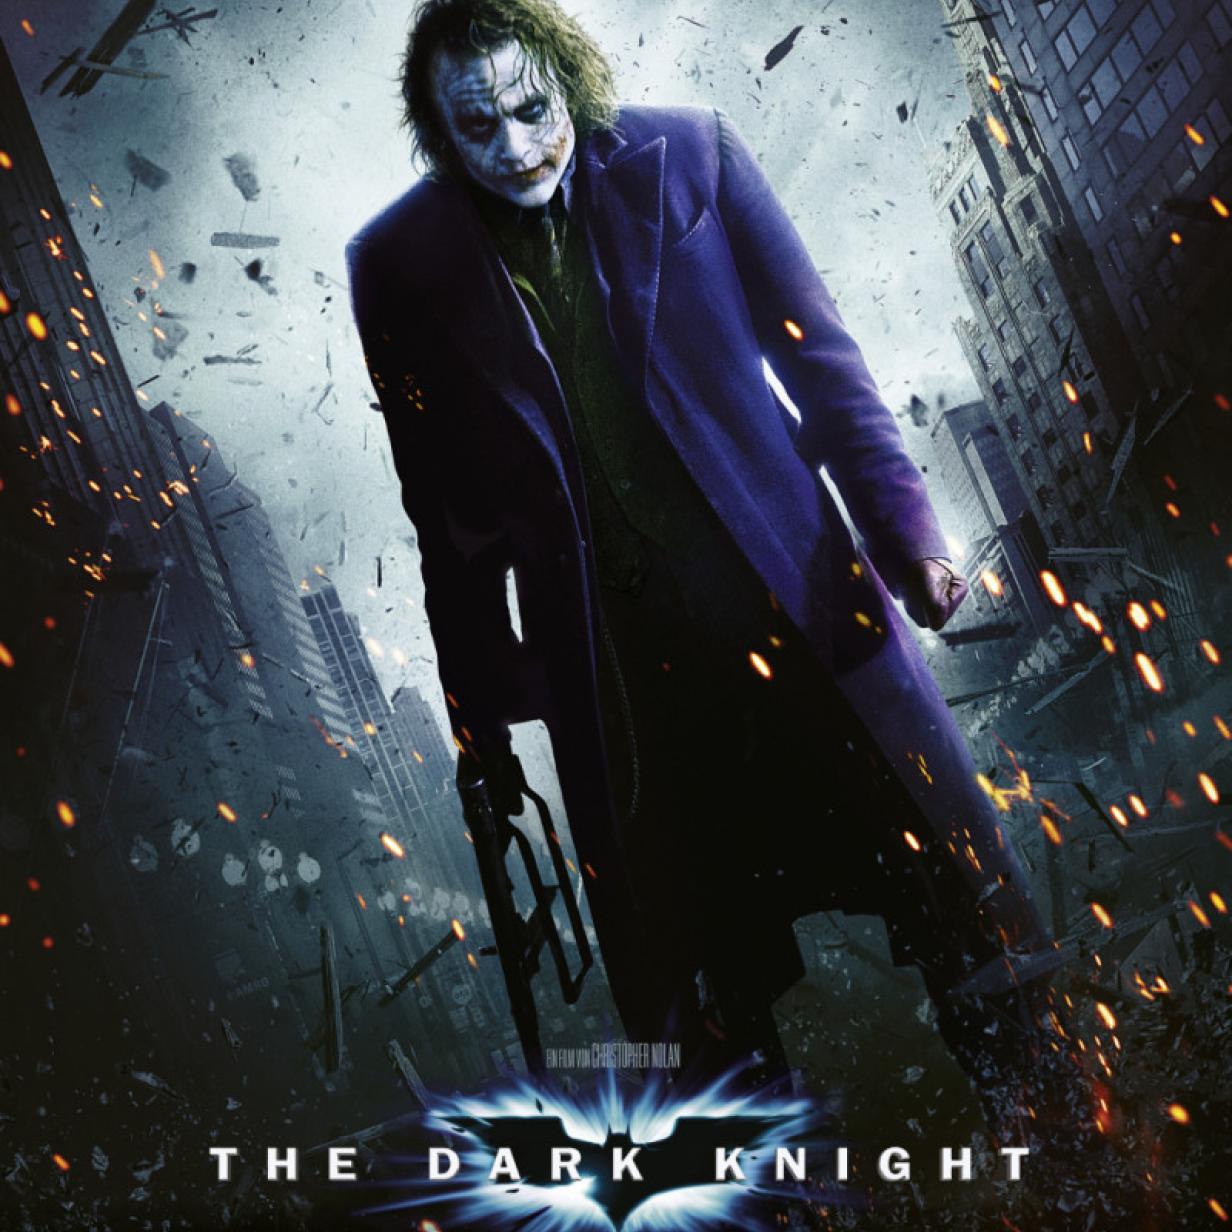 things that lived up to the hype - The Dark Knight